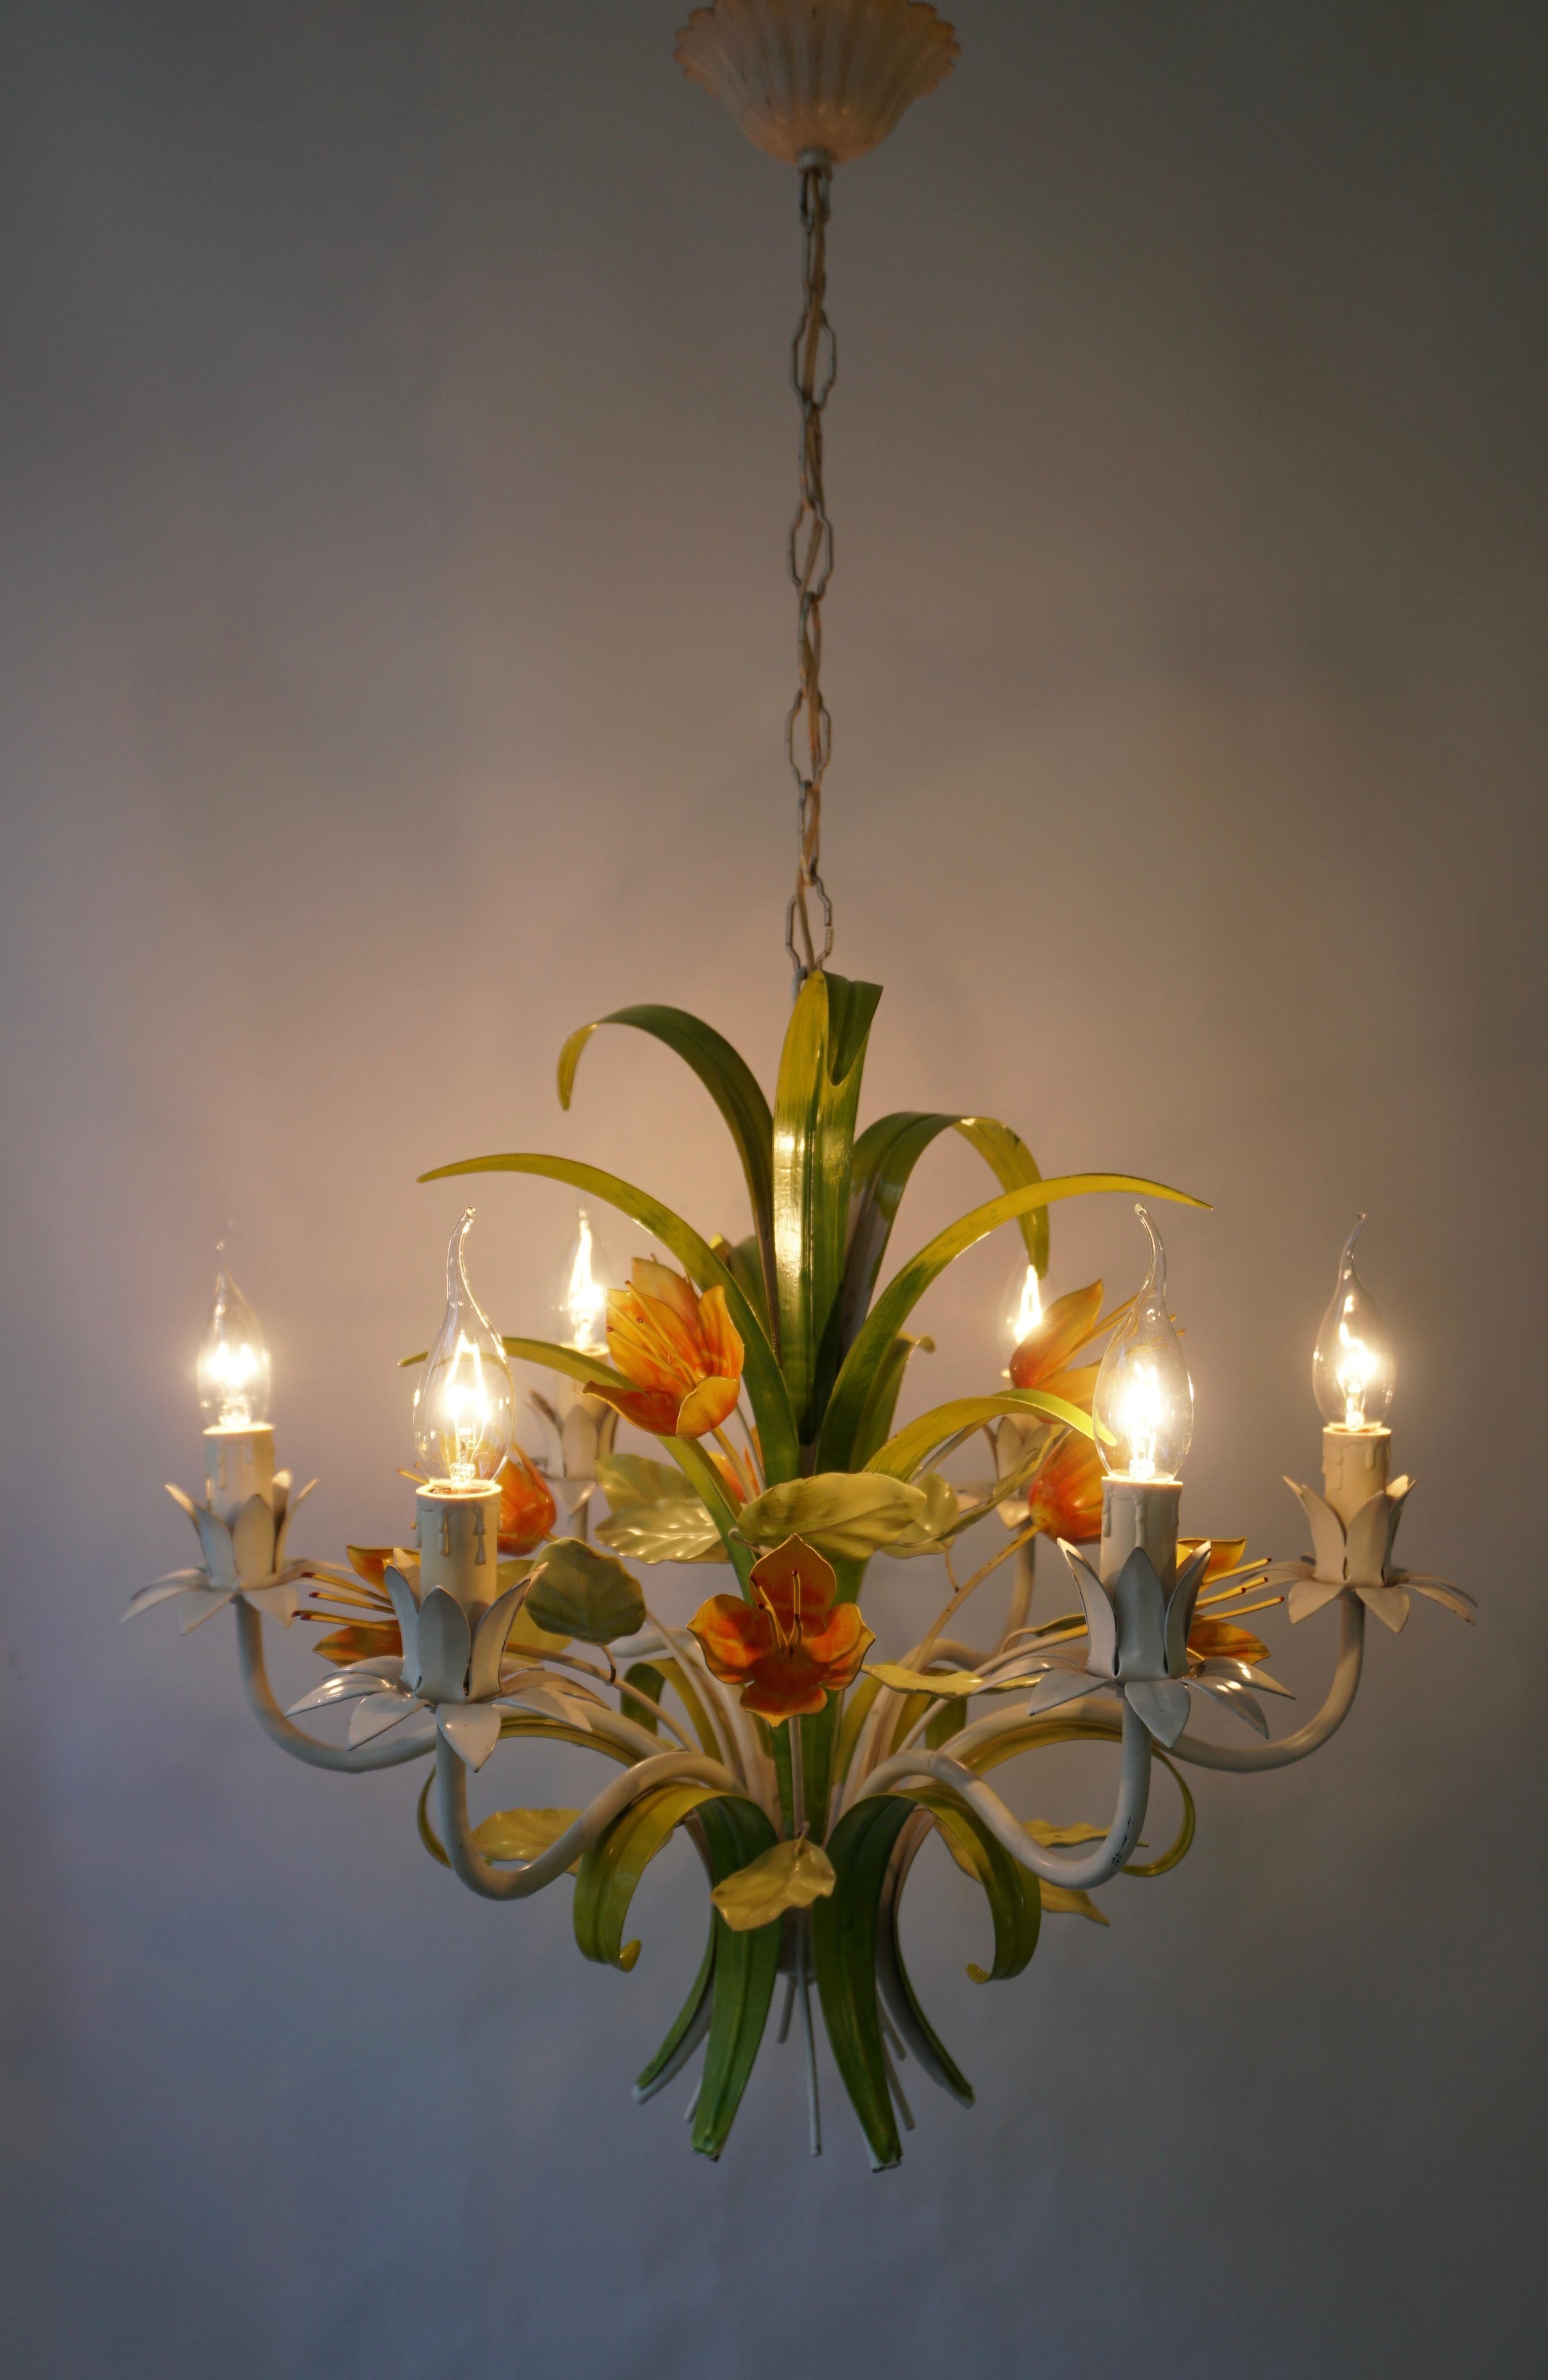 Mid-Century Modern 1960s Bright Boho Chic Italian Tole Painted Metal Chandelier With Floral Decor For Sale